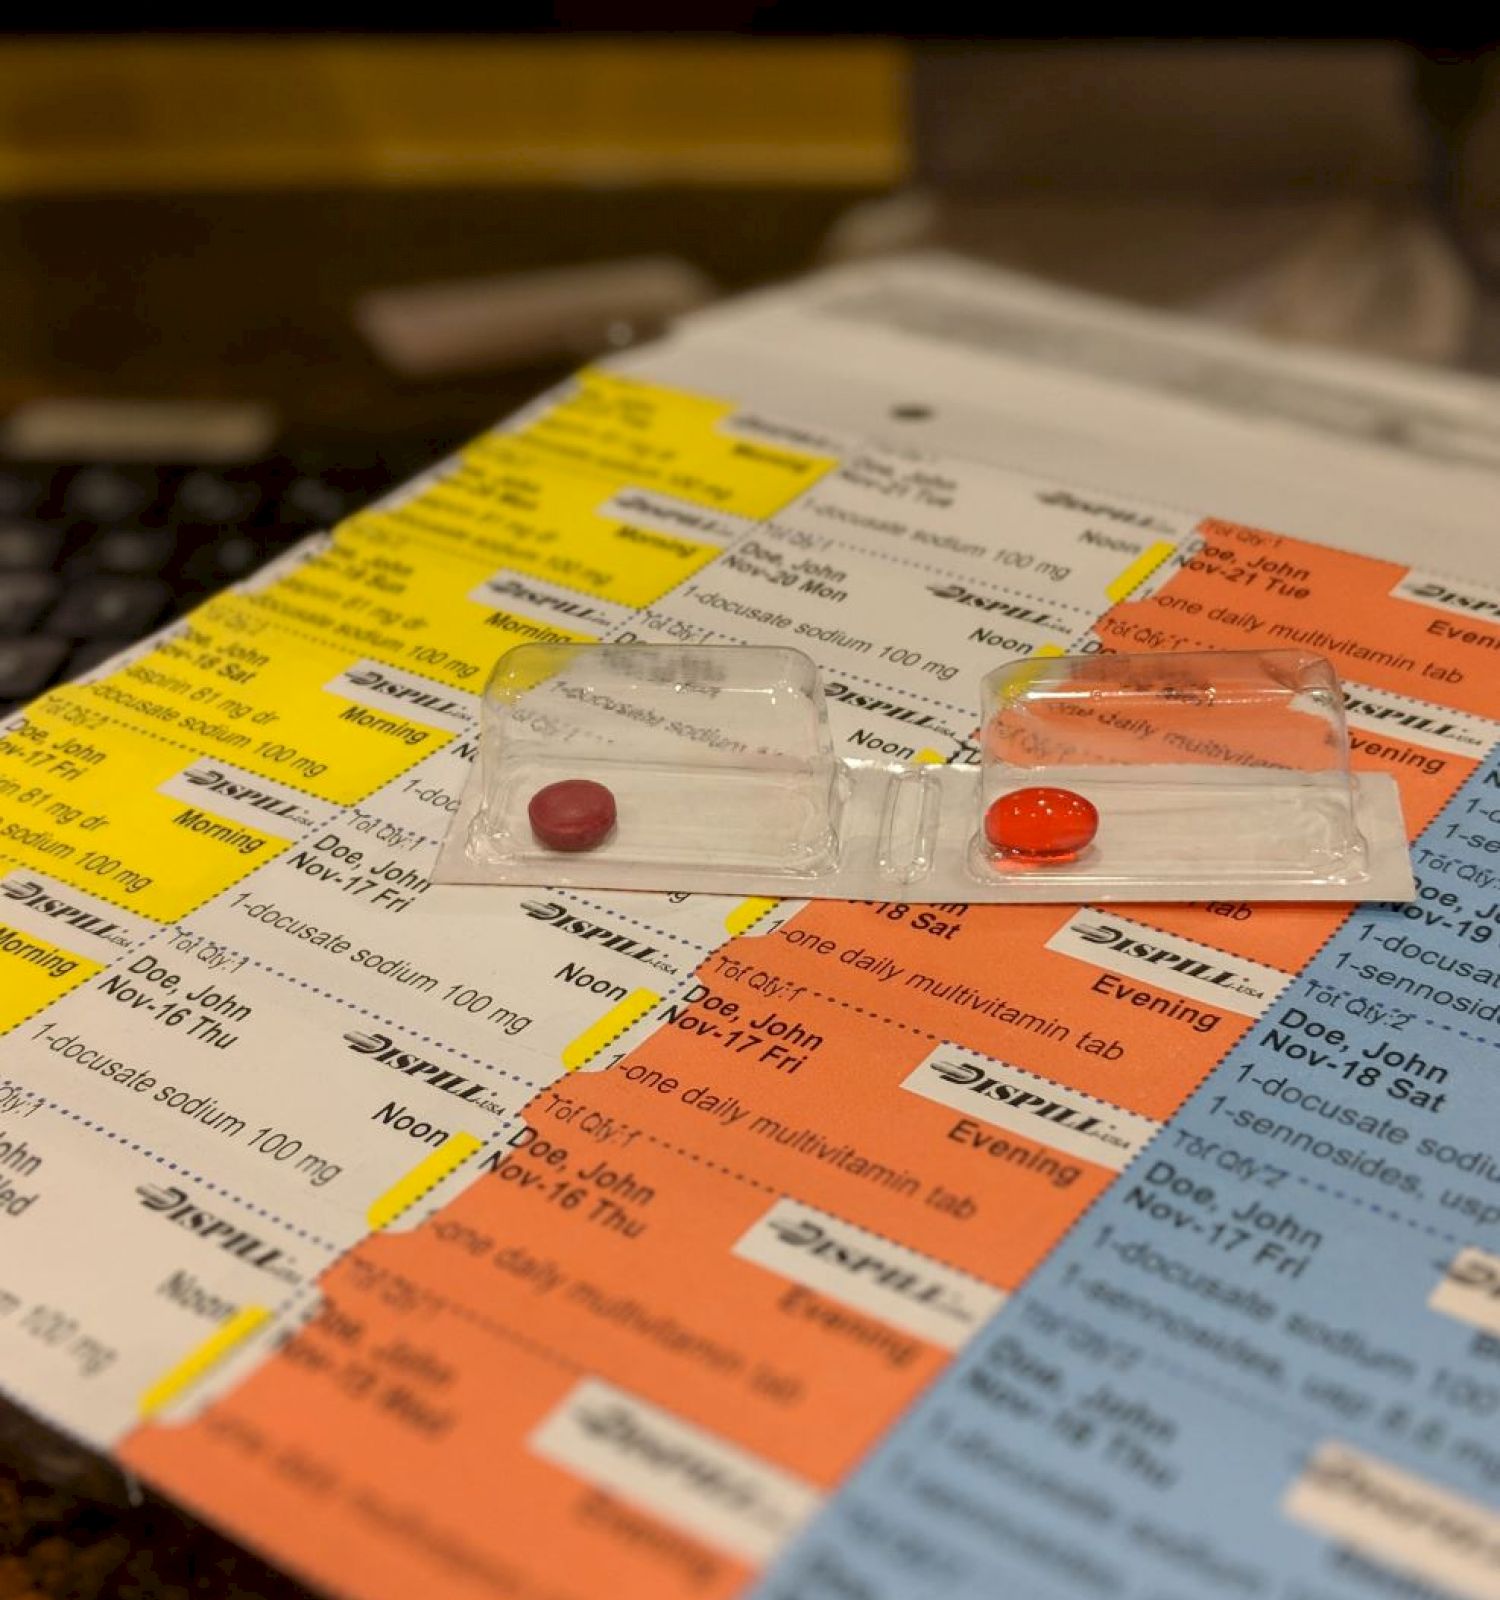 The image shows a color-coded medication schedule with two red pills in small plastic bags placed on top of it.